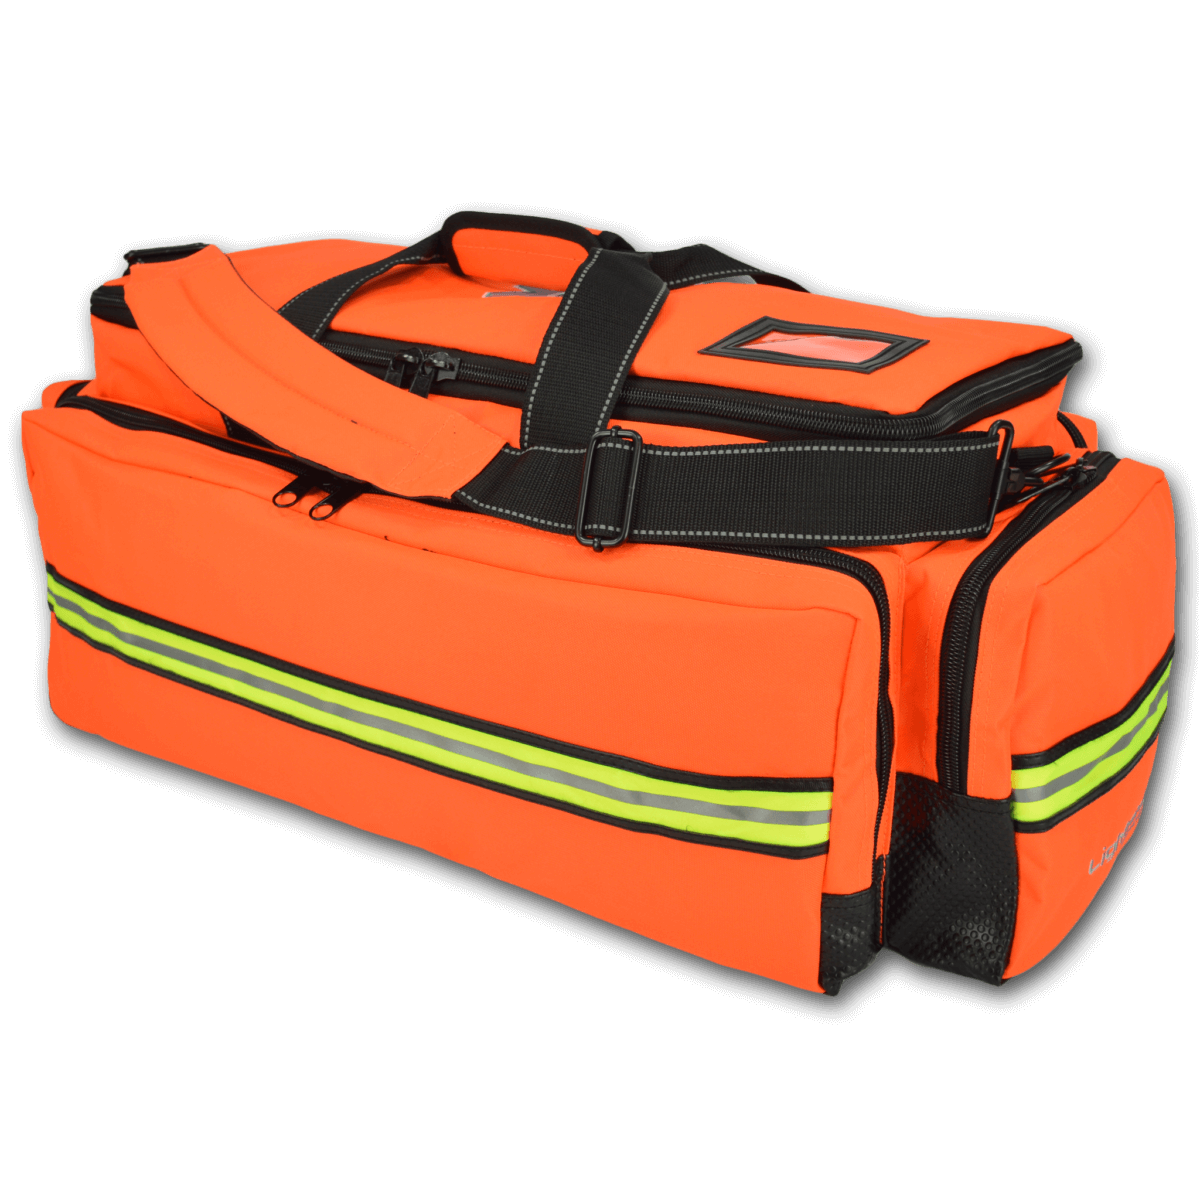 Lightning X Premium Oxygen Trauma Bag (LXMB50) | The Fire Center | The Fire Store | Store | FREE SHIPPING | The MB50 is a super sized medical bag that is ideal for EMS agencies or rescue squads. The main compartment is designed to hold a “D” sized oxygen cylinder with storage for all necessary oxygen delivery devices.